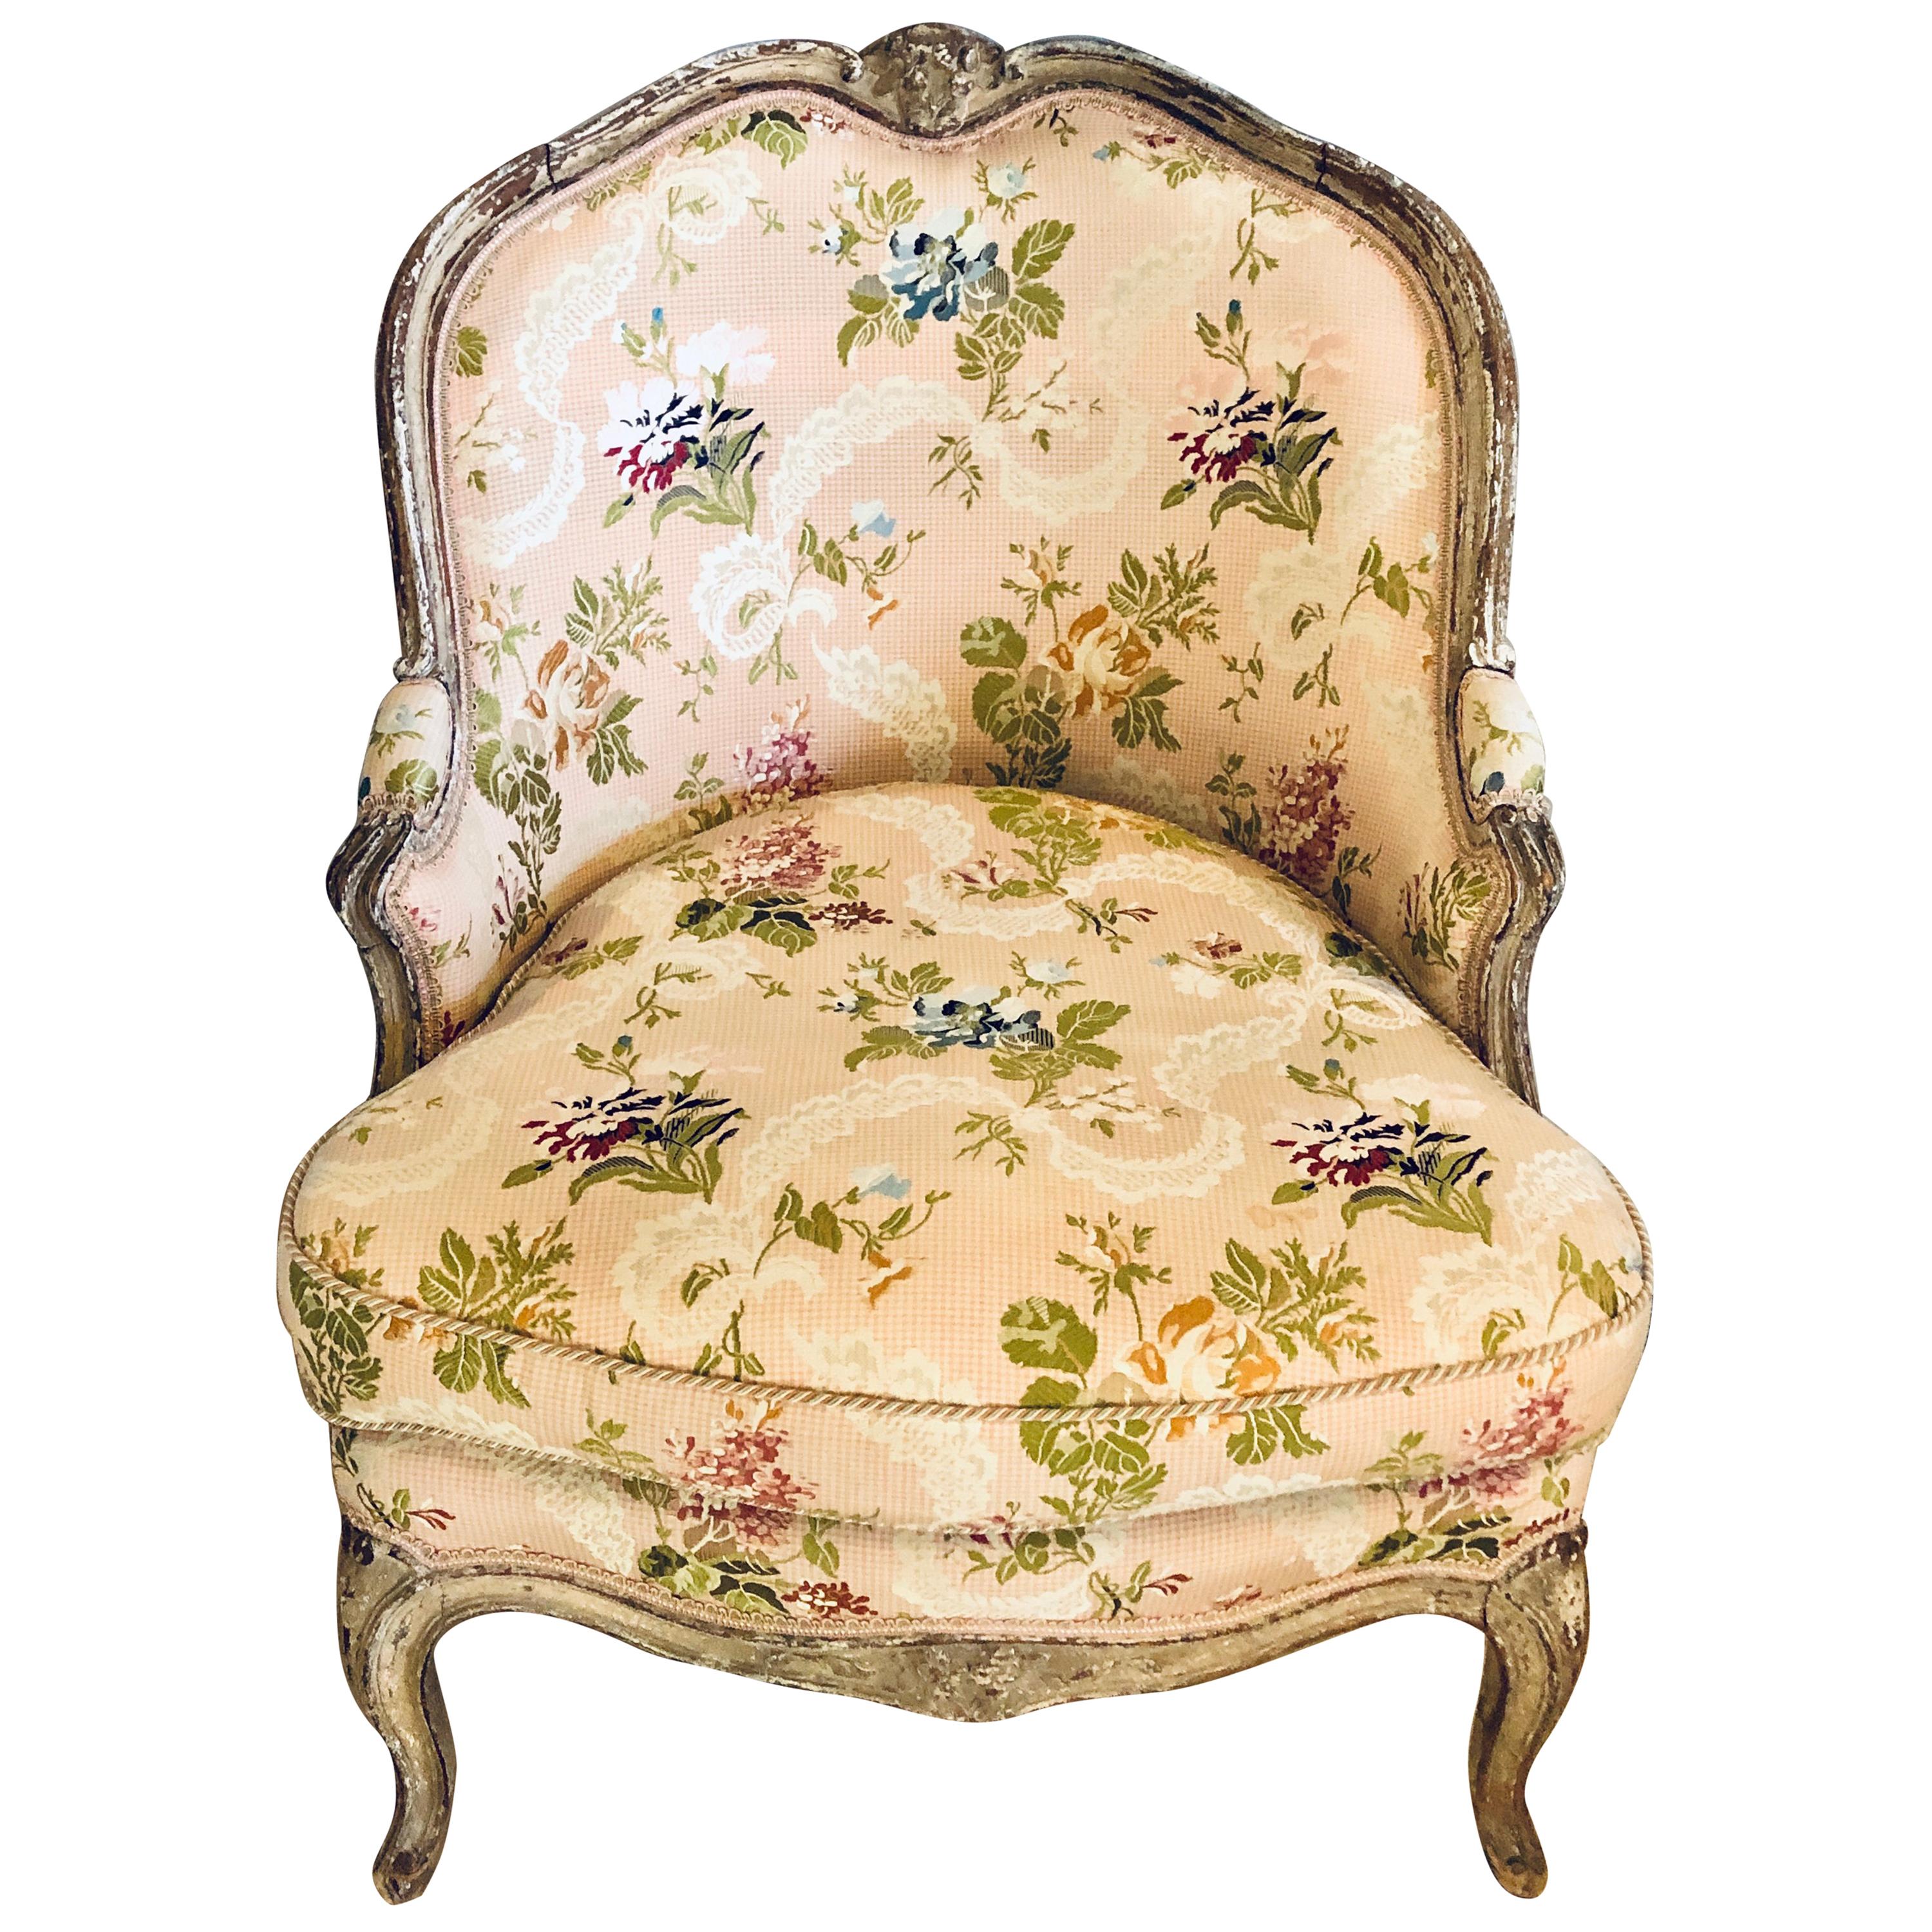 Diminutive Distressed Painted Louis XV Style Slipper Chair in Scalmandre Fabric